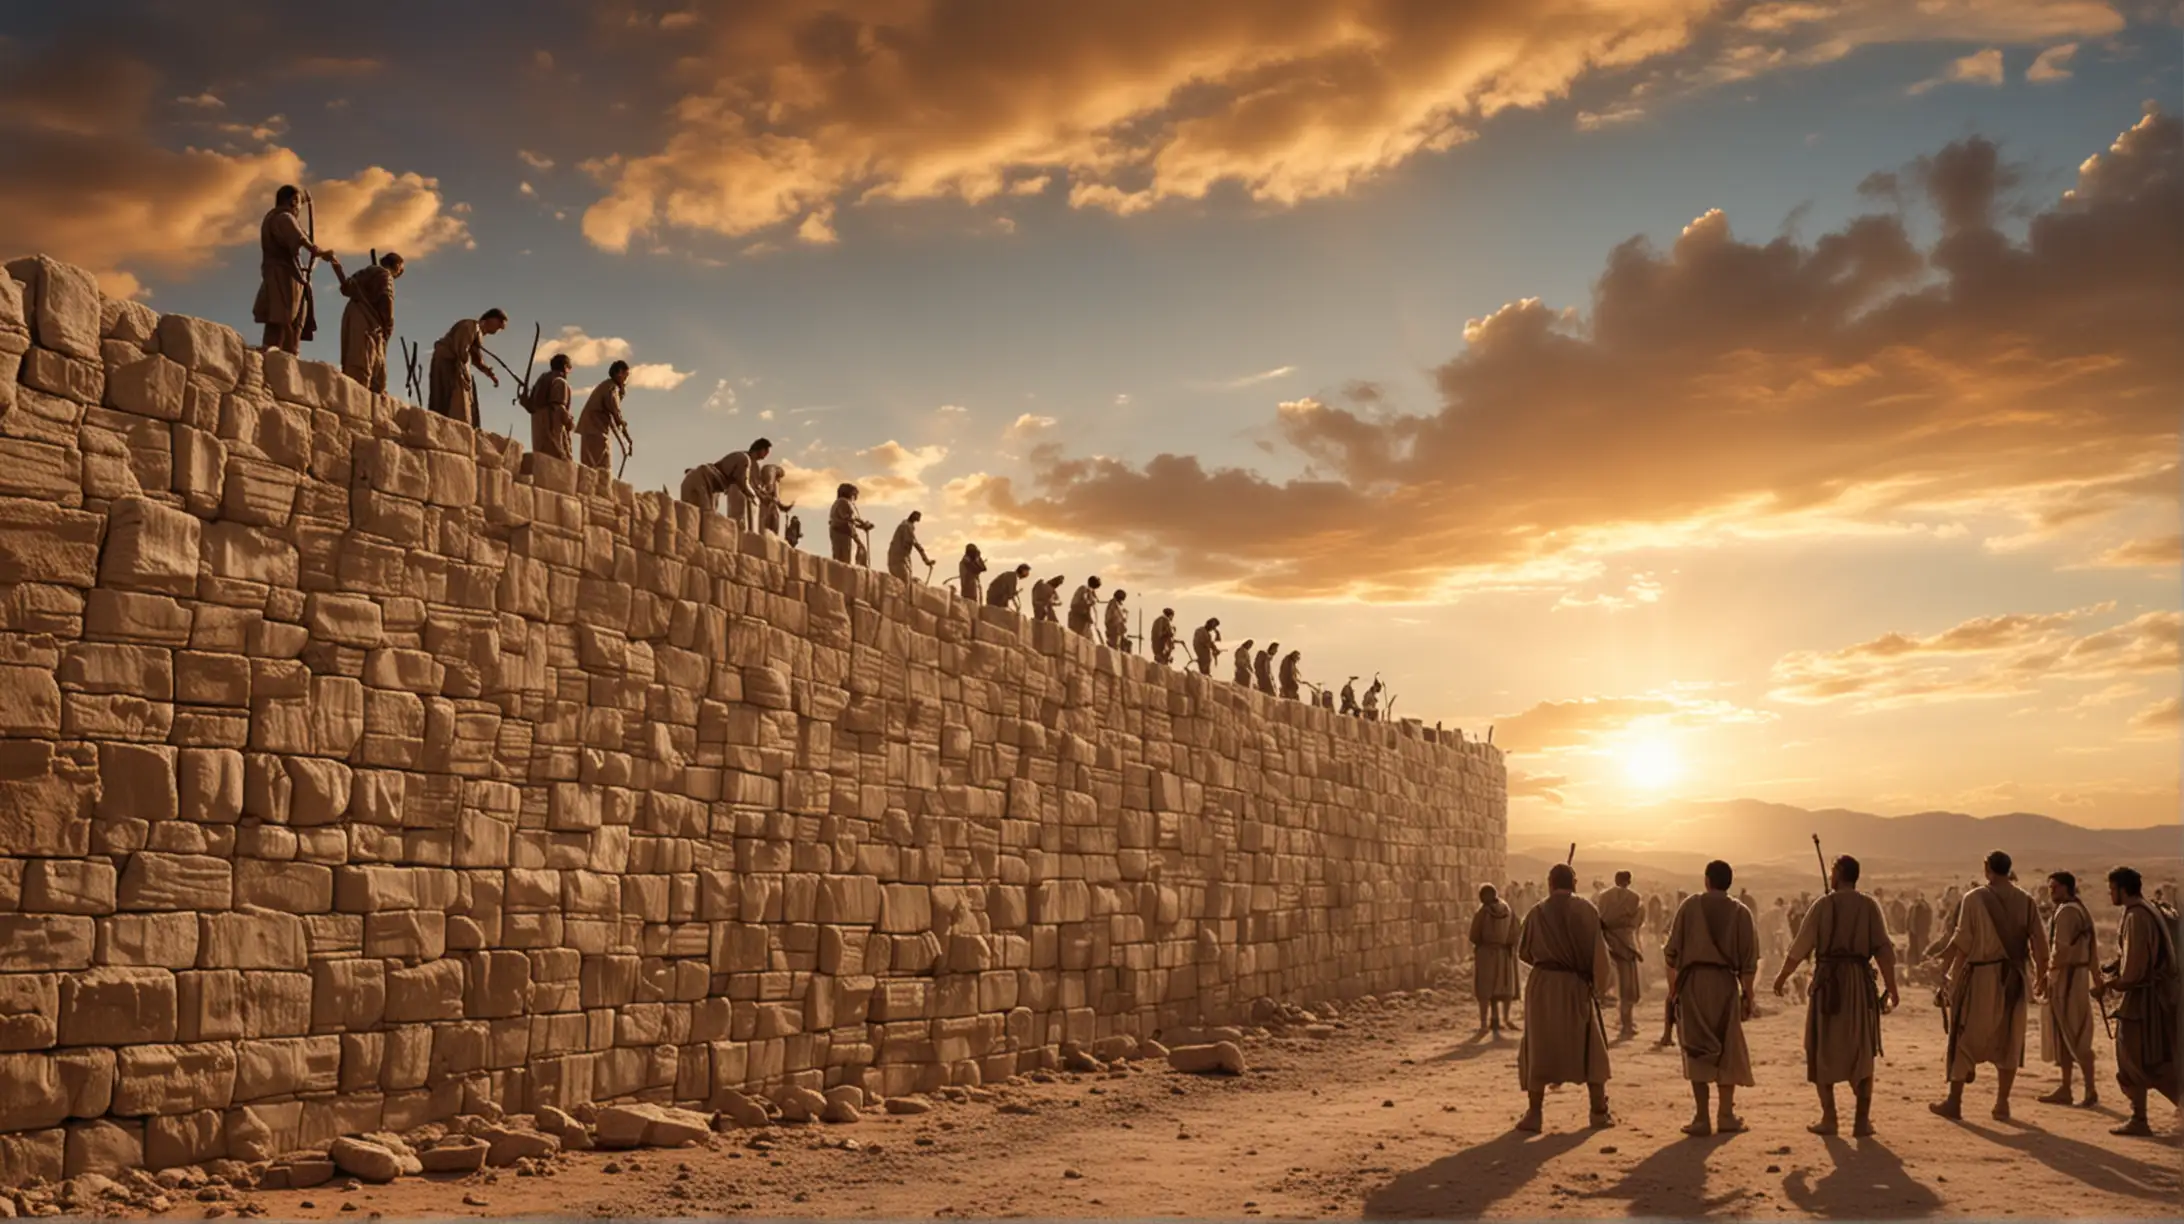 Several men building a wall a wall in a desert city with a magnificent sky in the background. Set during the biblical era.